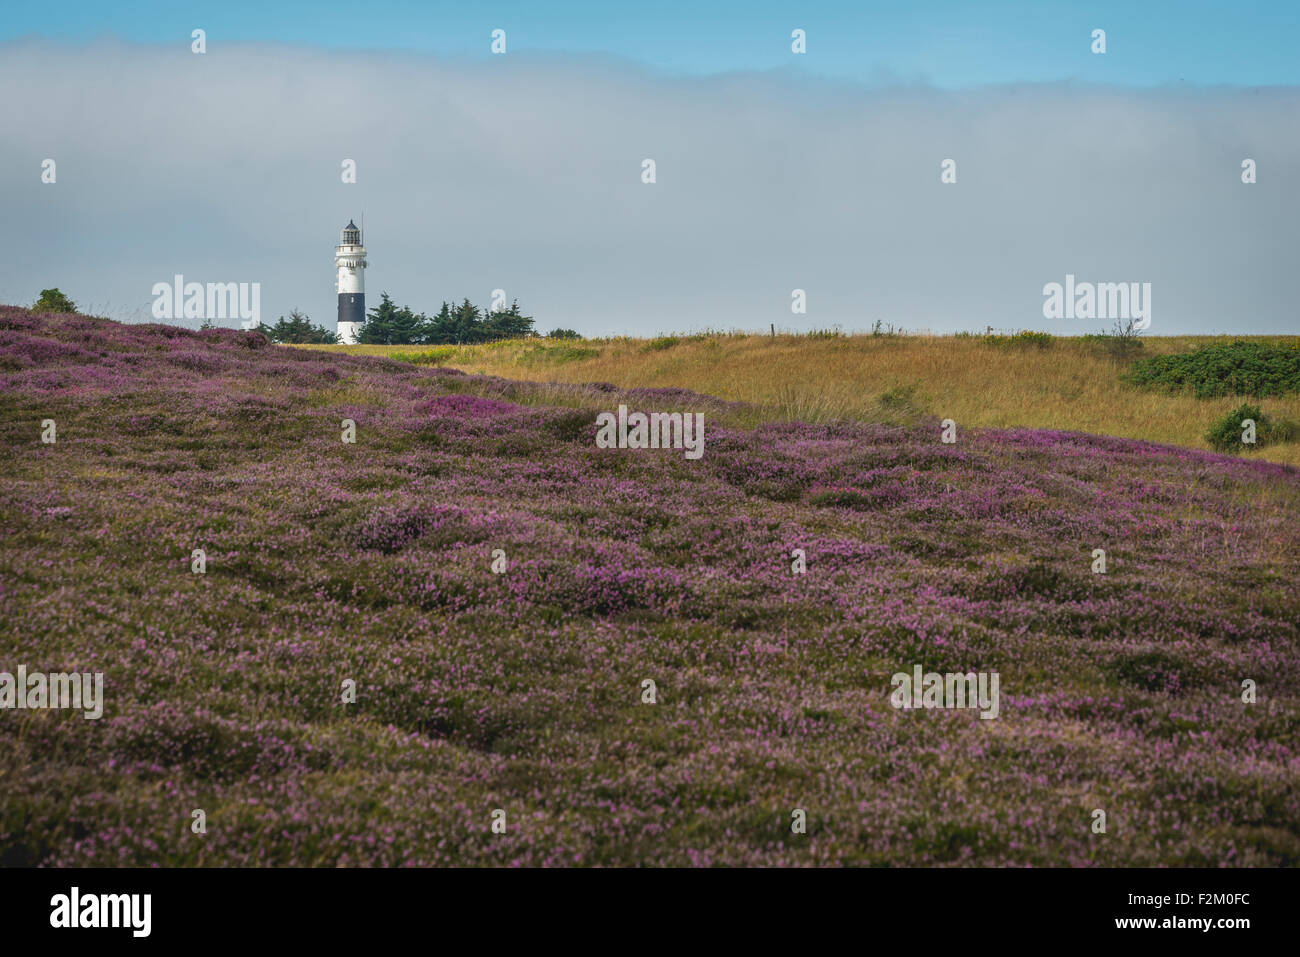 Germany, Sylt, Kampen, view to light house with Braderup Heath in the foreground Stock Photo